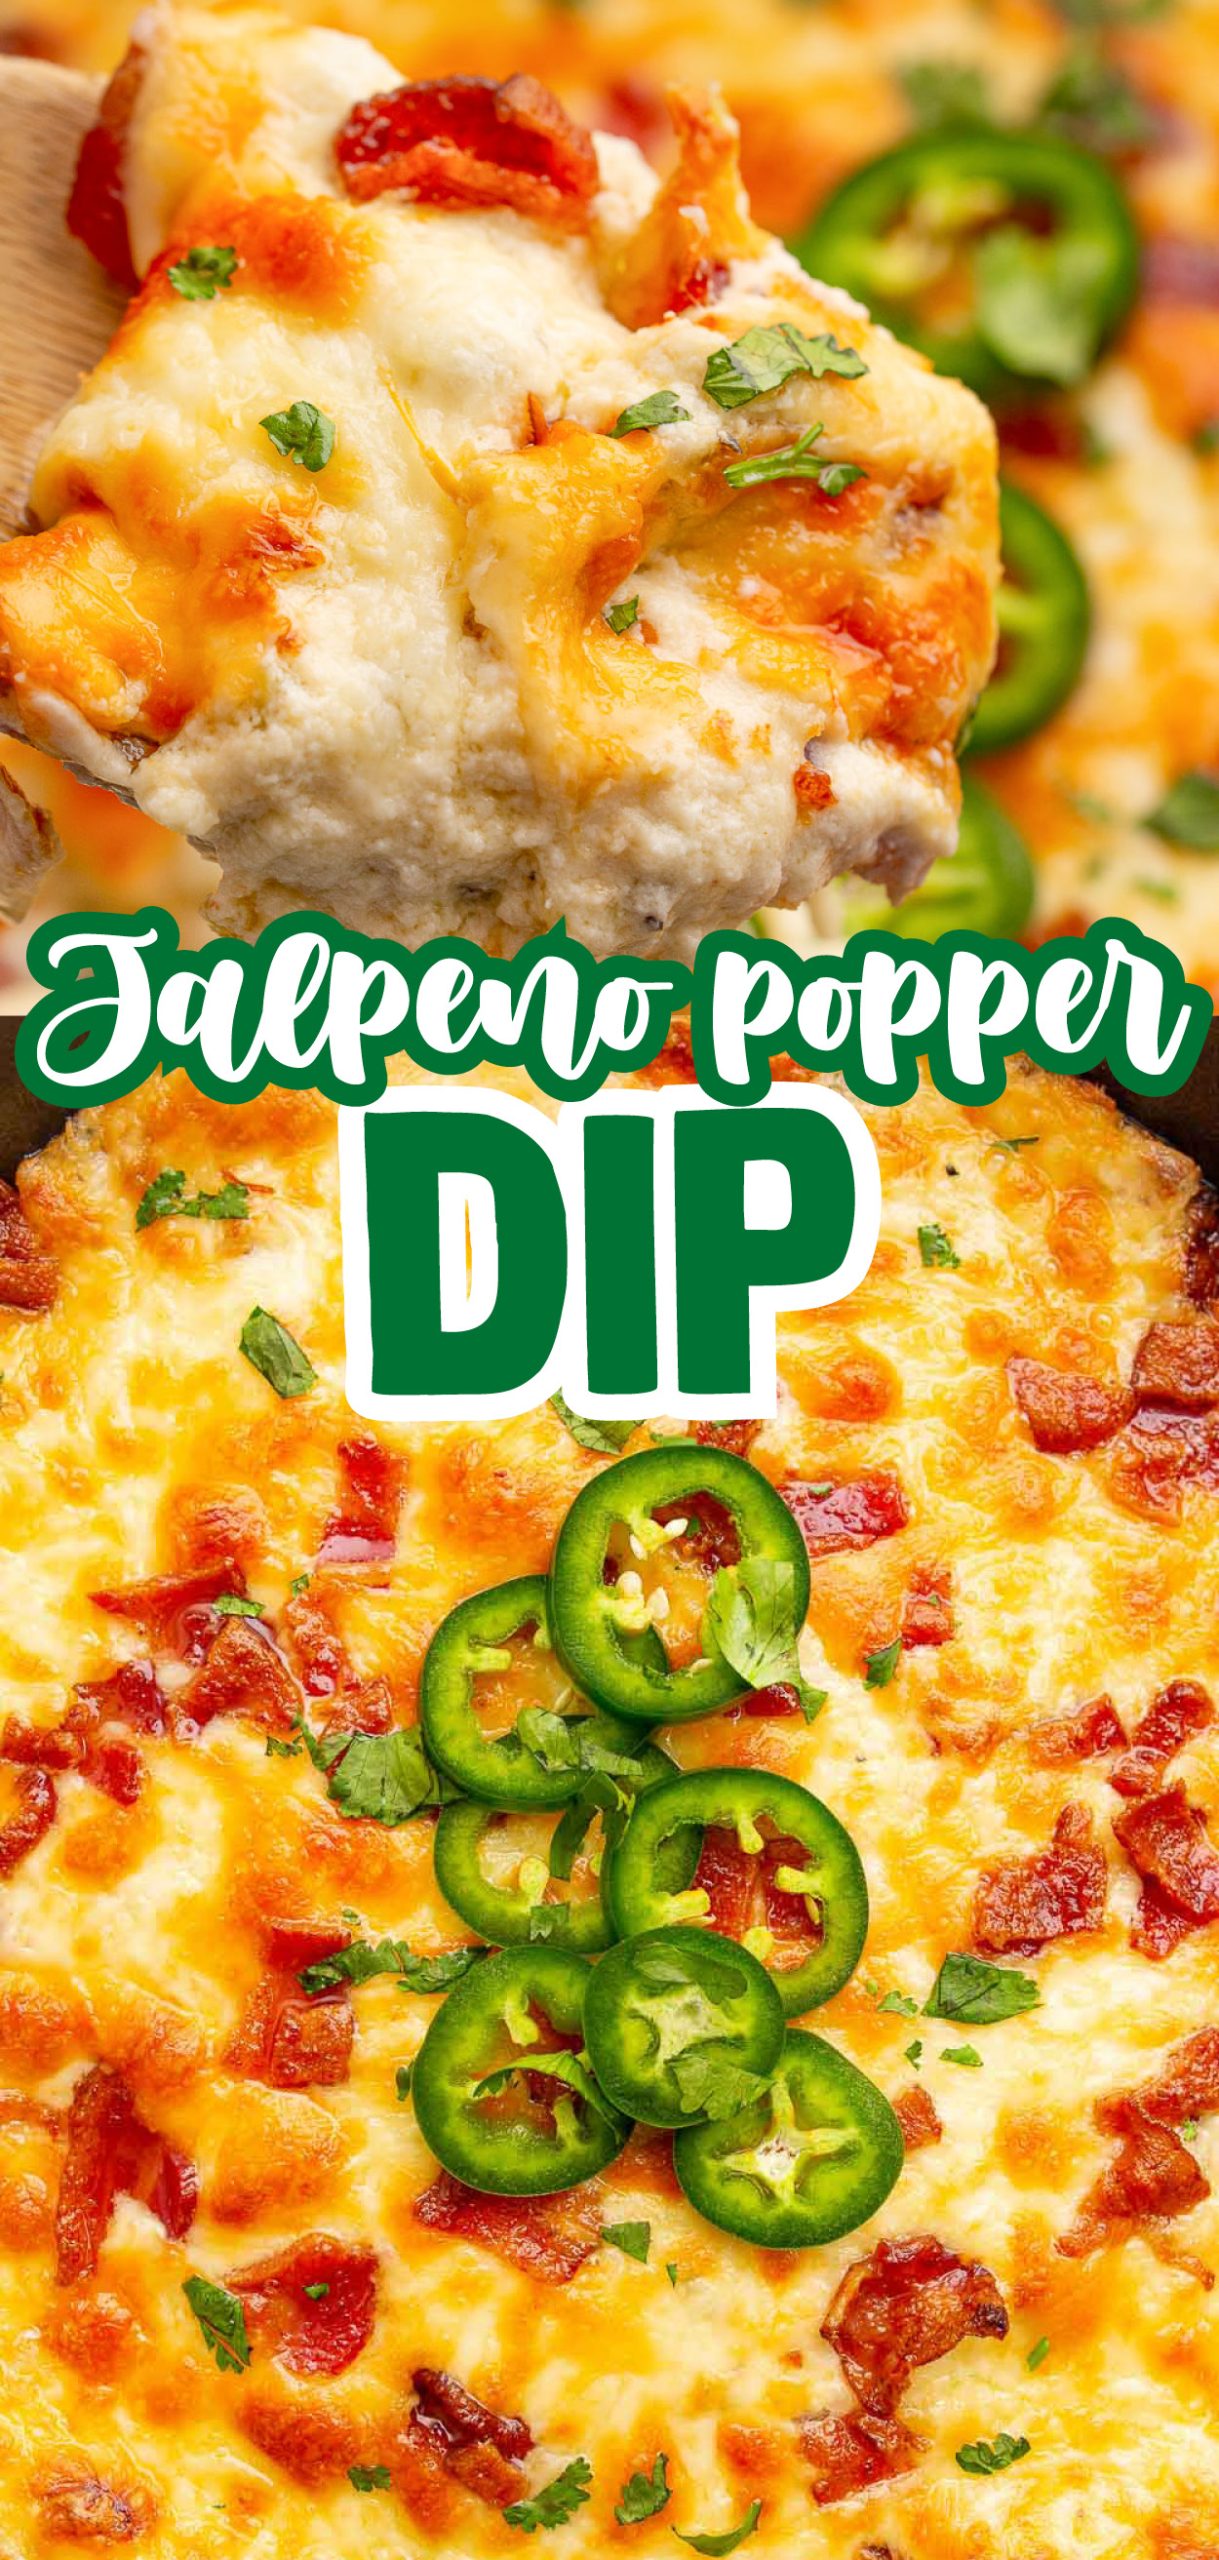 Jalapeño popper dip is so much easier to make than Jalapeño poppers! Super-cheesy, creamy, jalapeño dip. Even people who can't totally handle the heat will love this. 